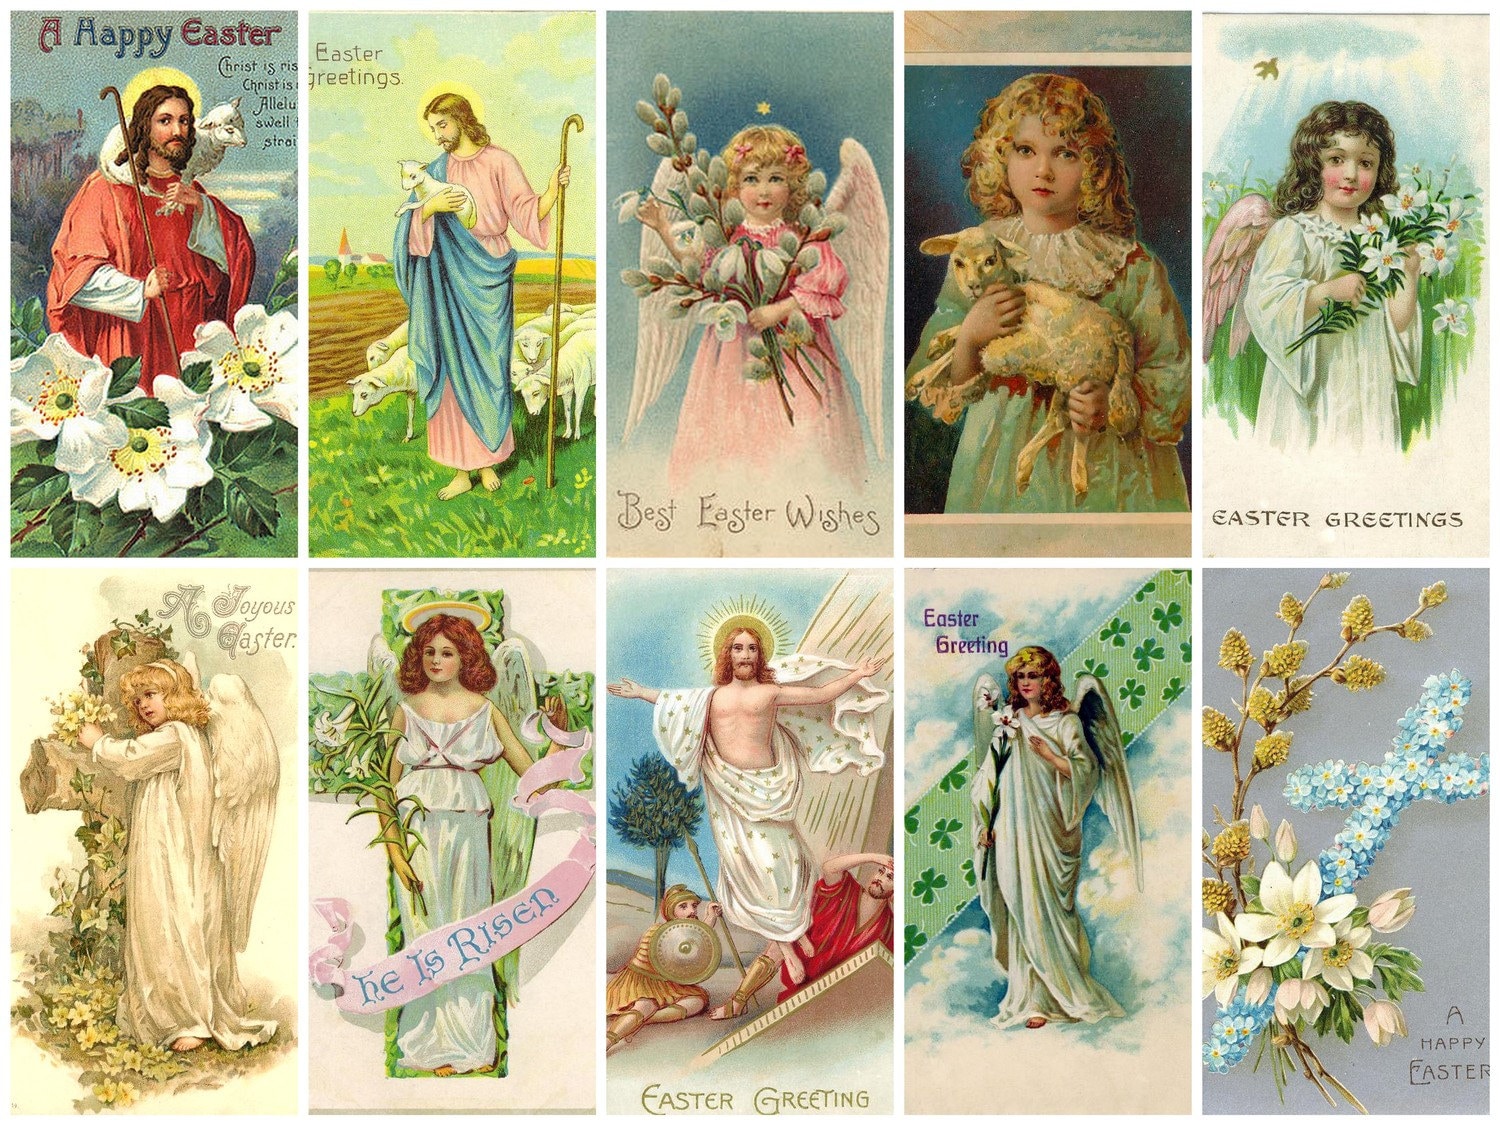 Vintage Religious Images